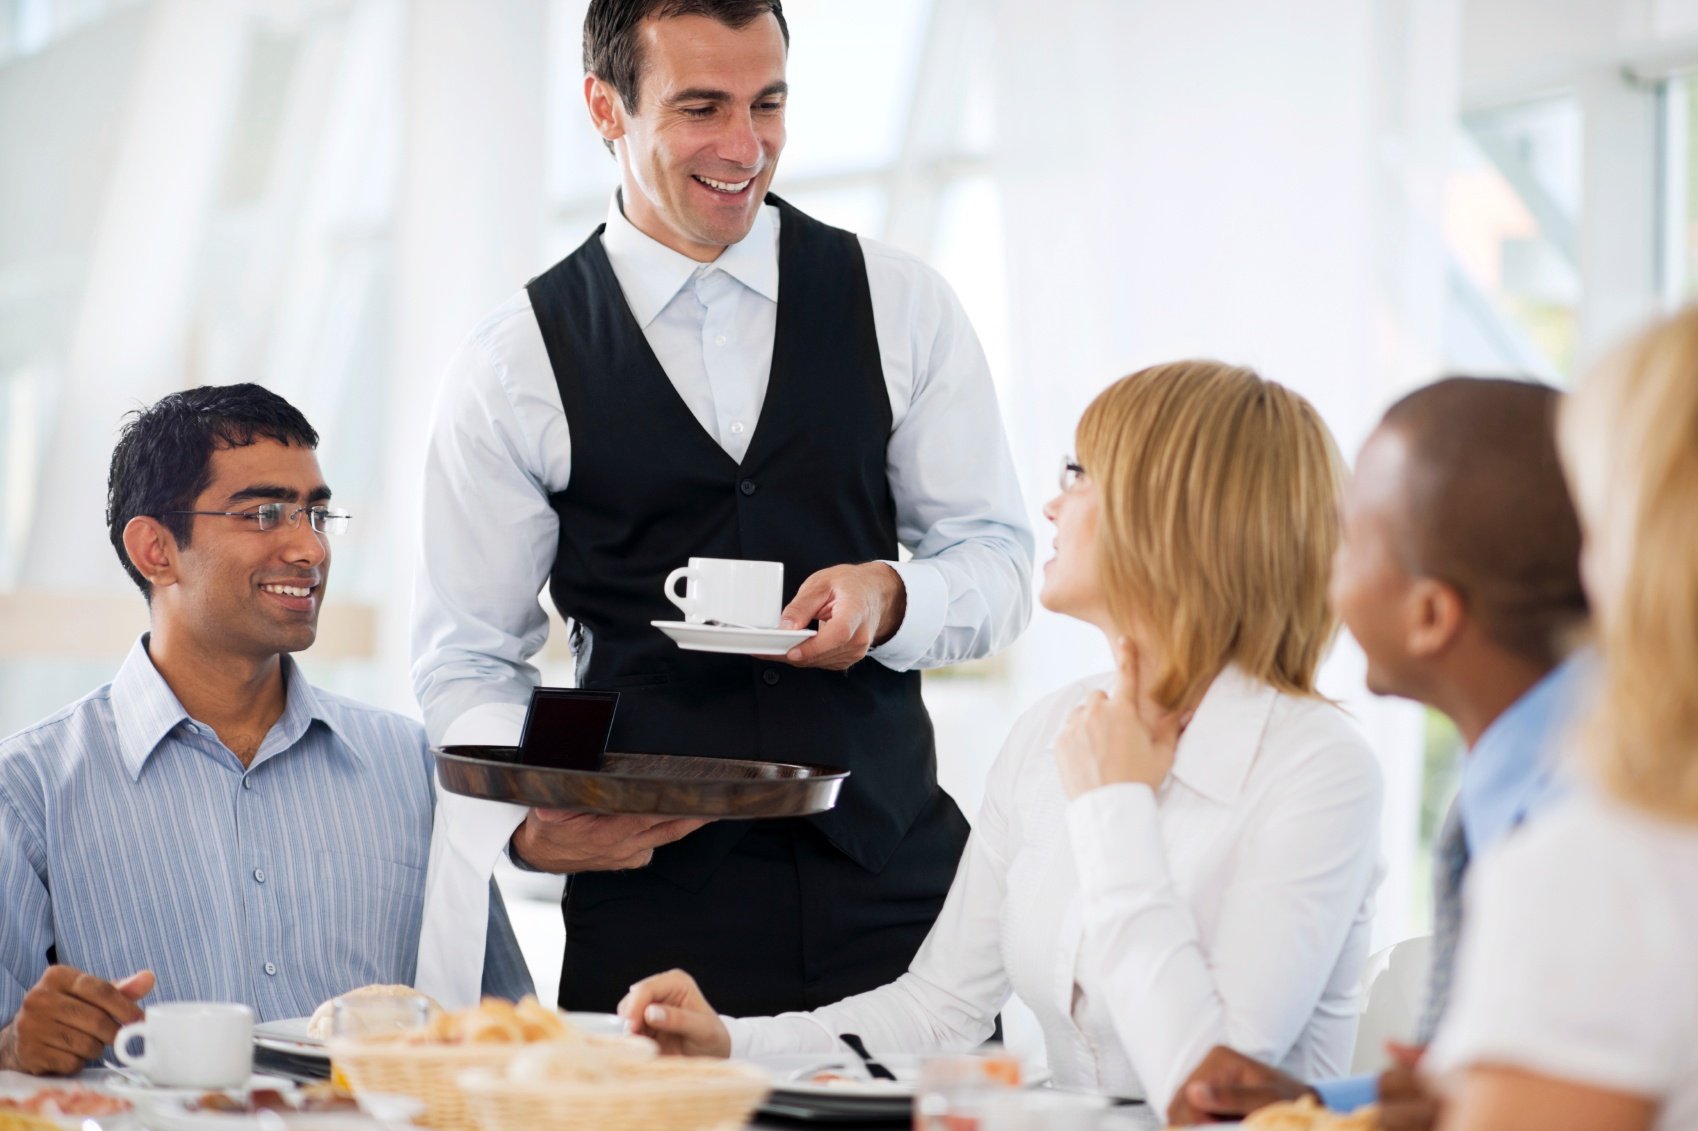 Understanding Your Restaurant Guests: Going Beyond the Why?